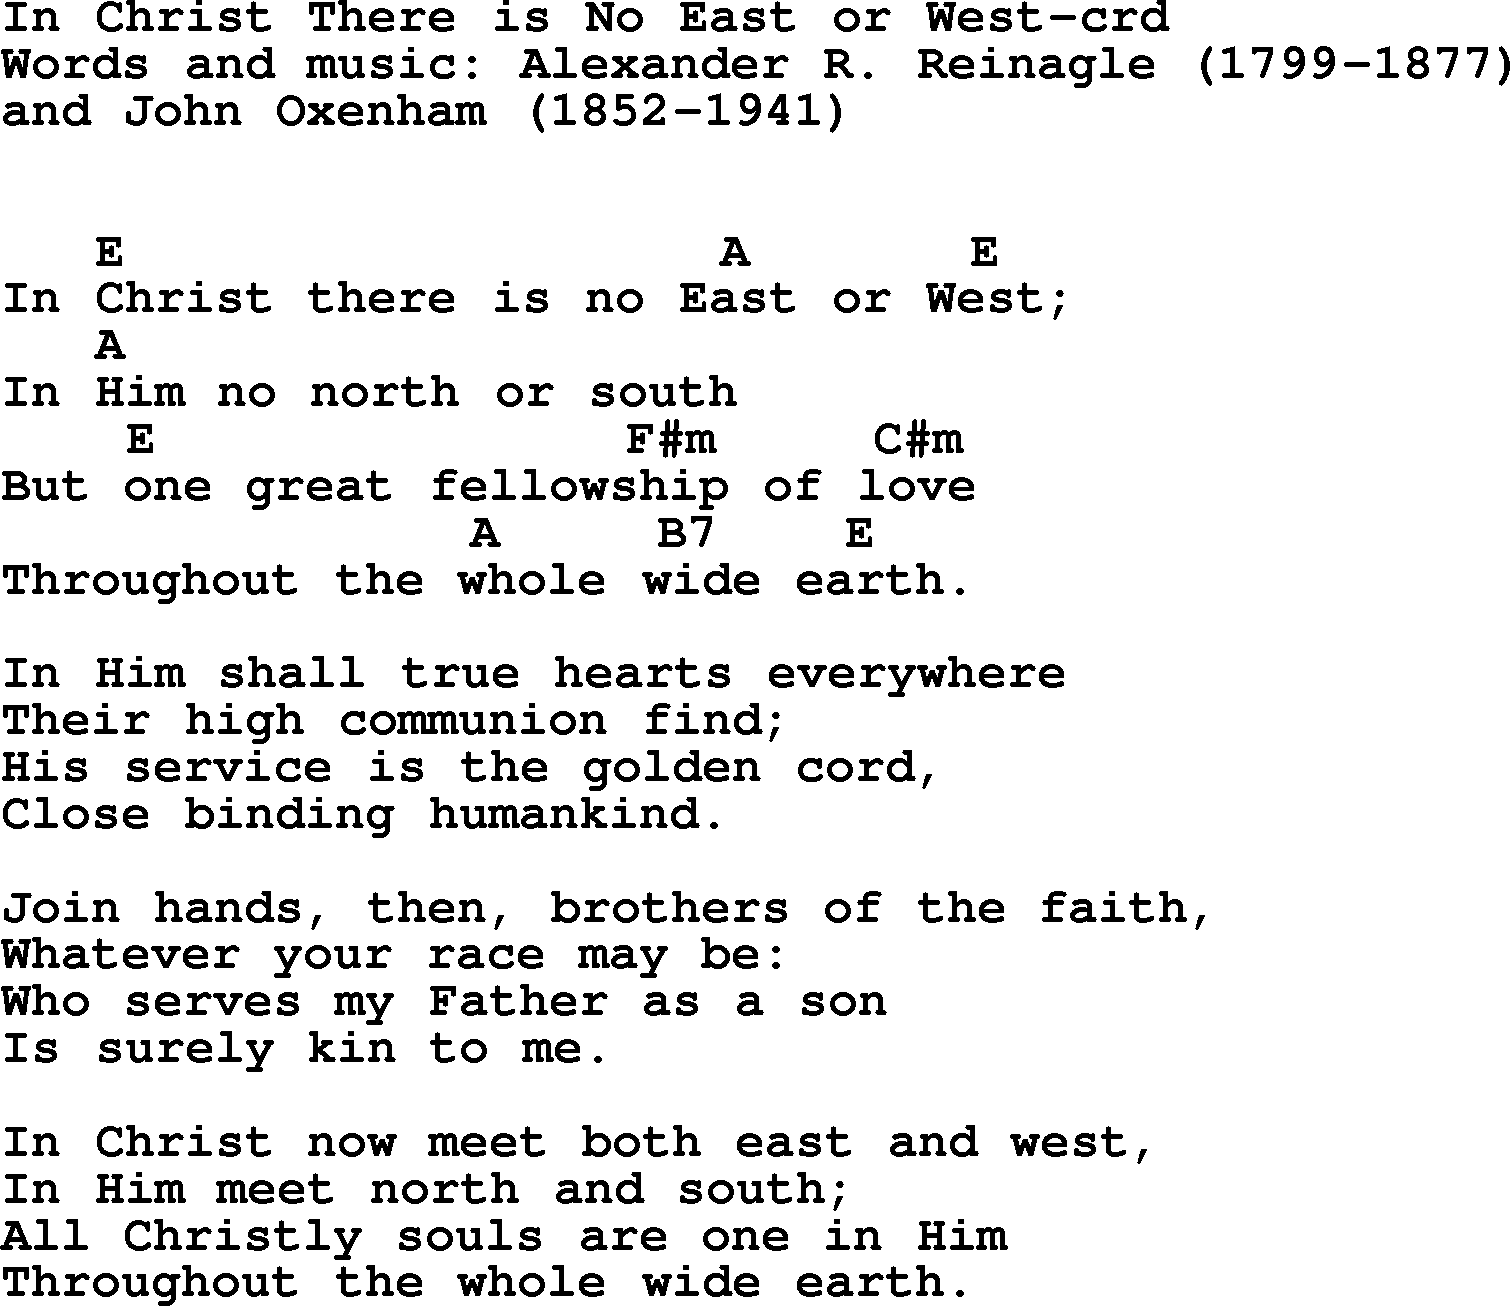 Top 500 Hymn: In Christ There Is No East Or West, lyrics and chords